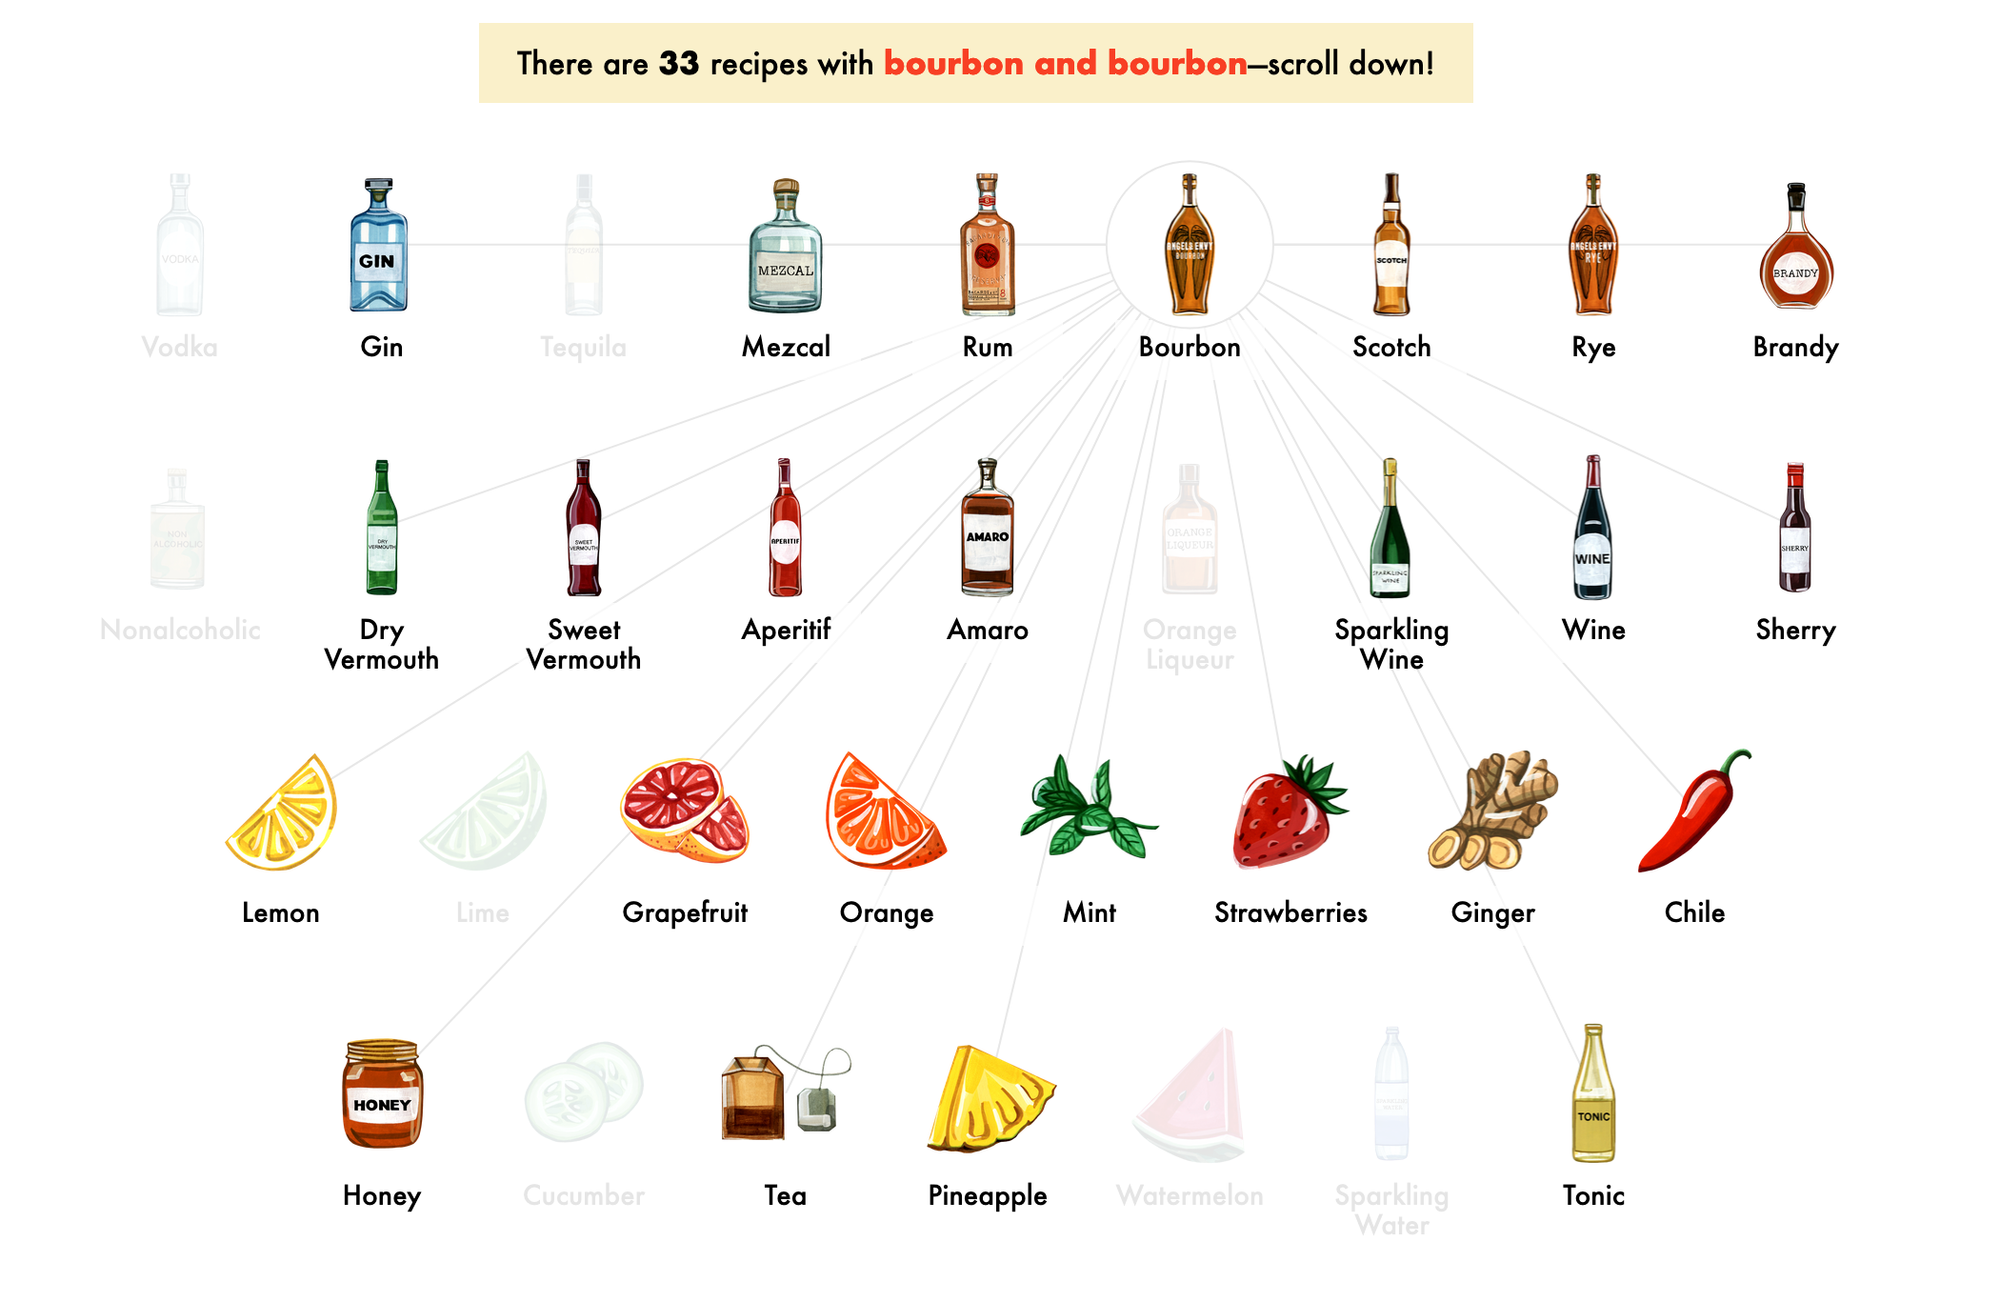 Screenshot of the Interactive Cocktail Cabinet. Visualization shows 4 rows of assorted ingredients. Clicking on any one ingredient shows or hides other related ingredients that could form a recipe.